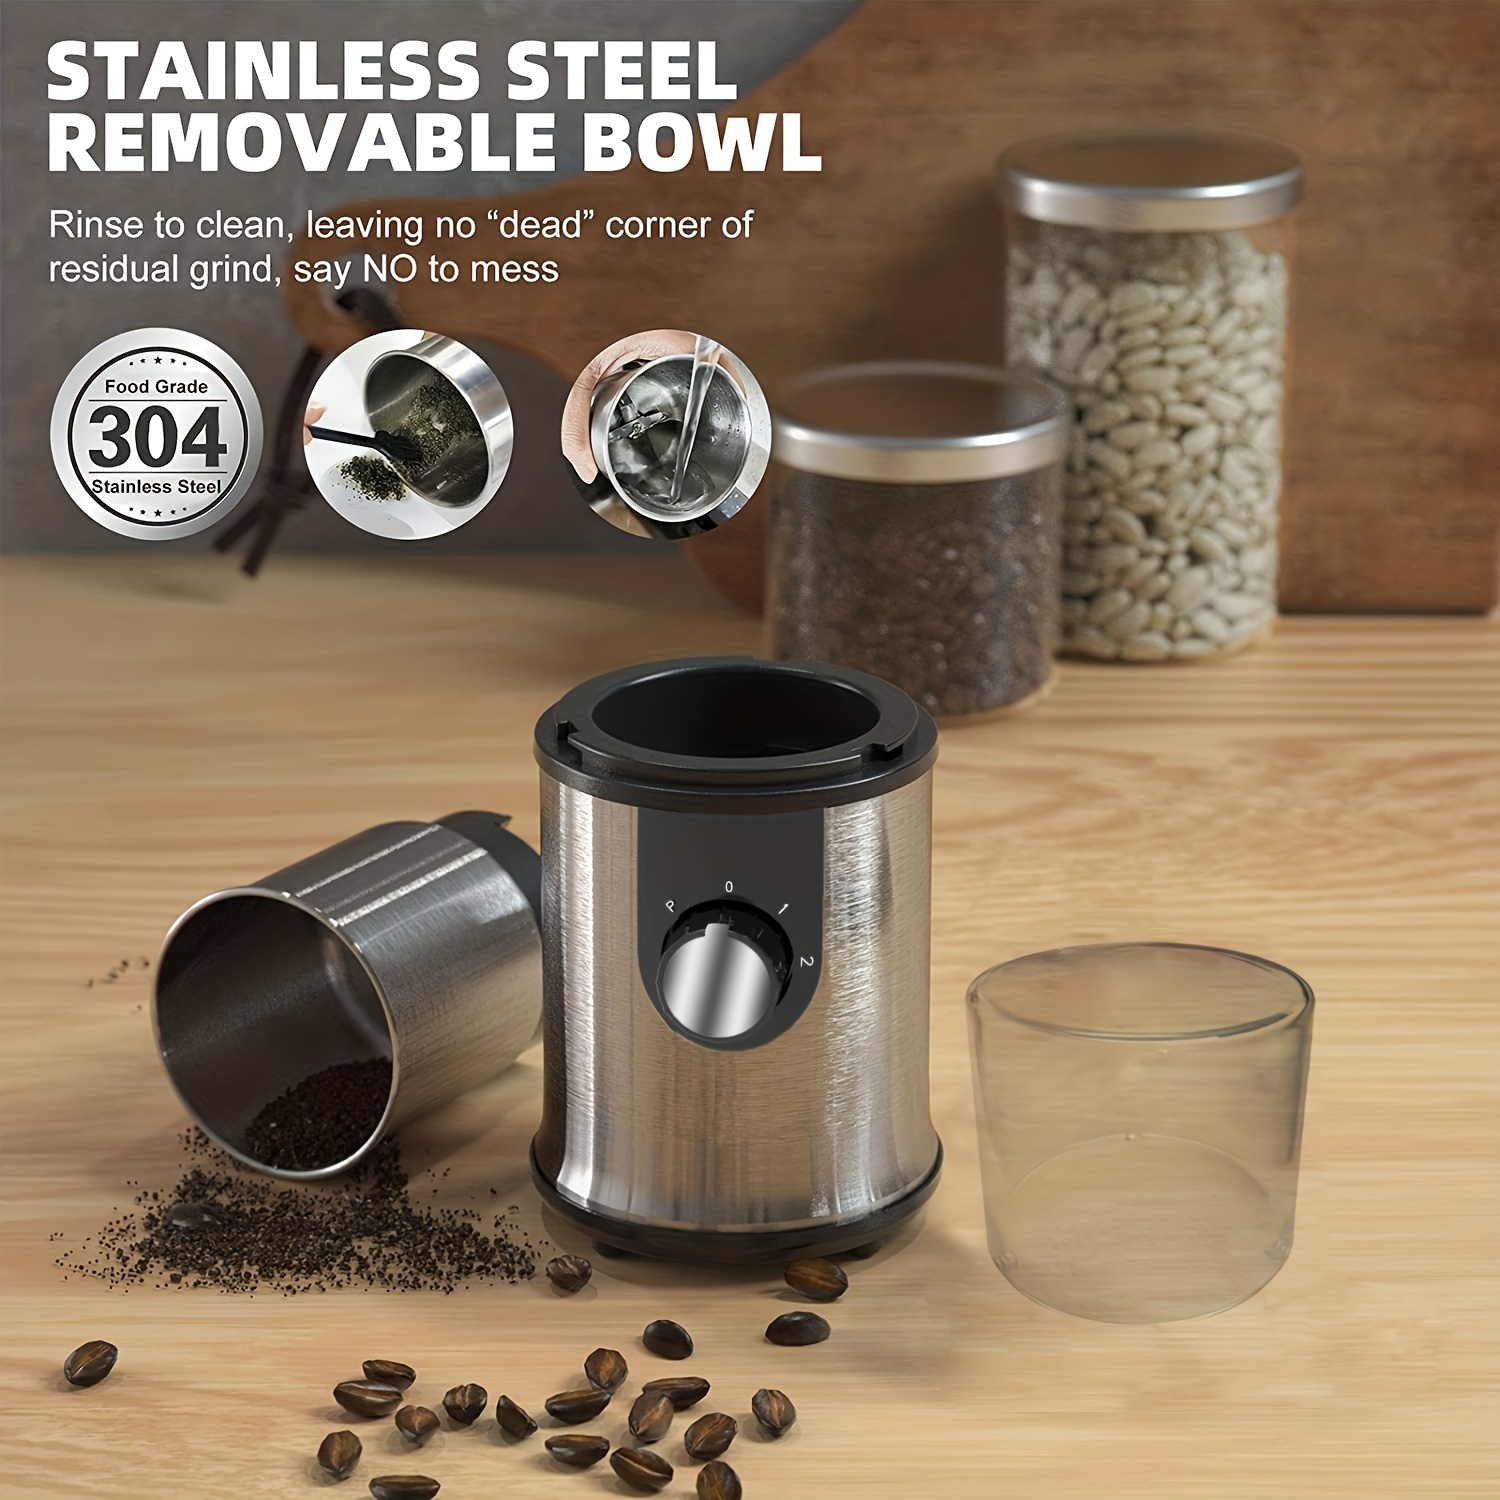 BLACK+DECKER Grinder One Touch Push-Button Control, 2/3 Cup Coffee Bean  Capacity, Stainless Steel